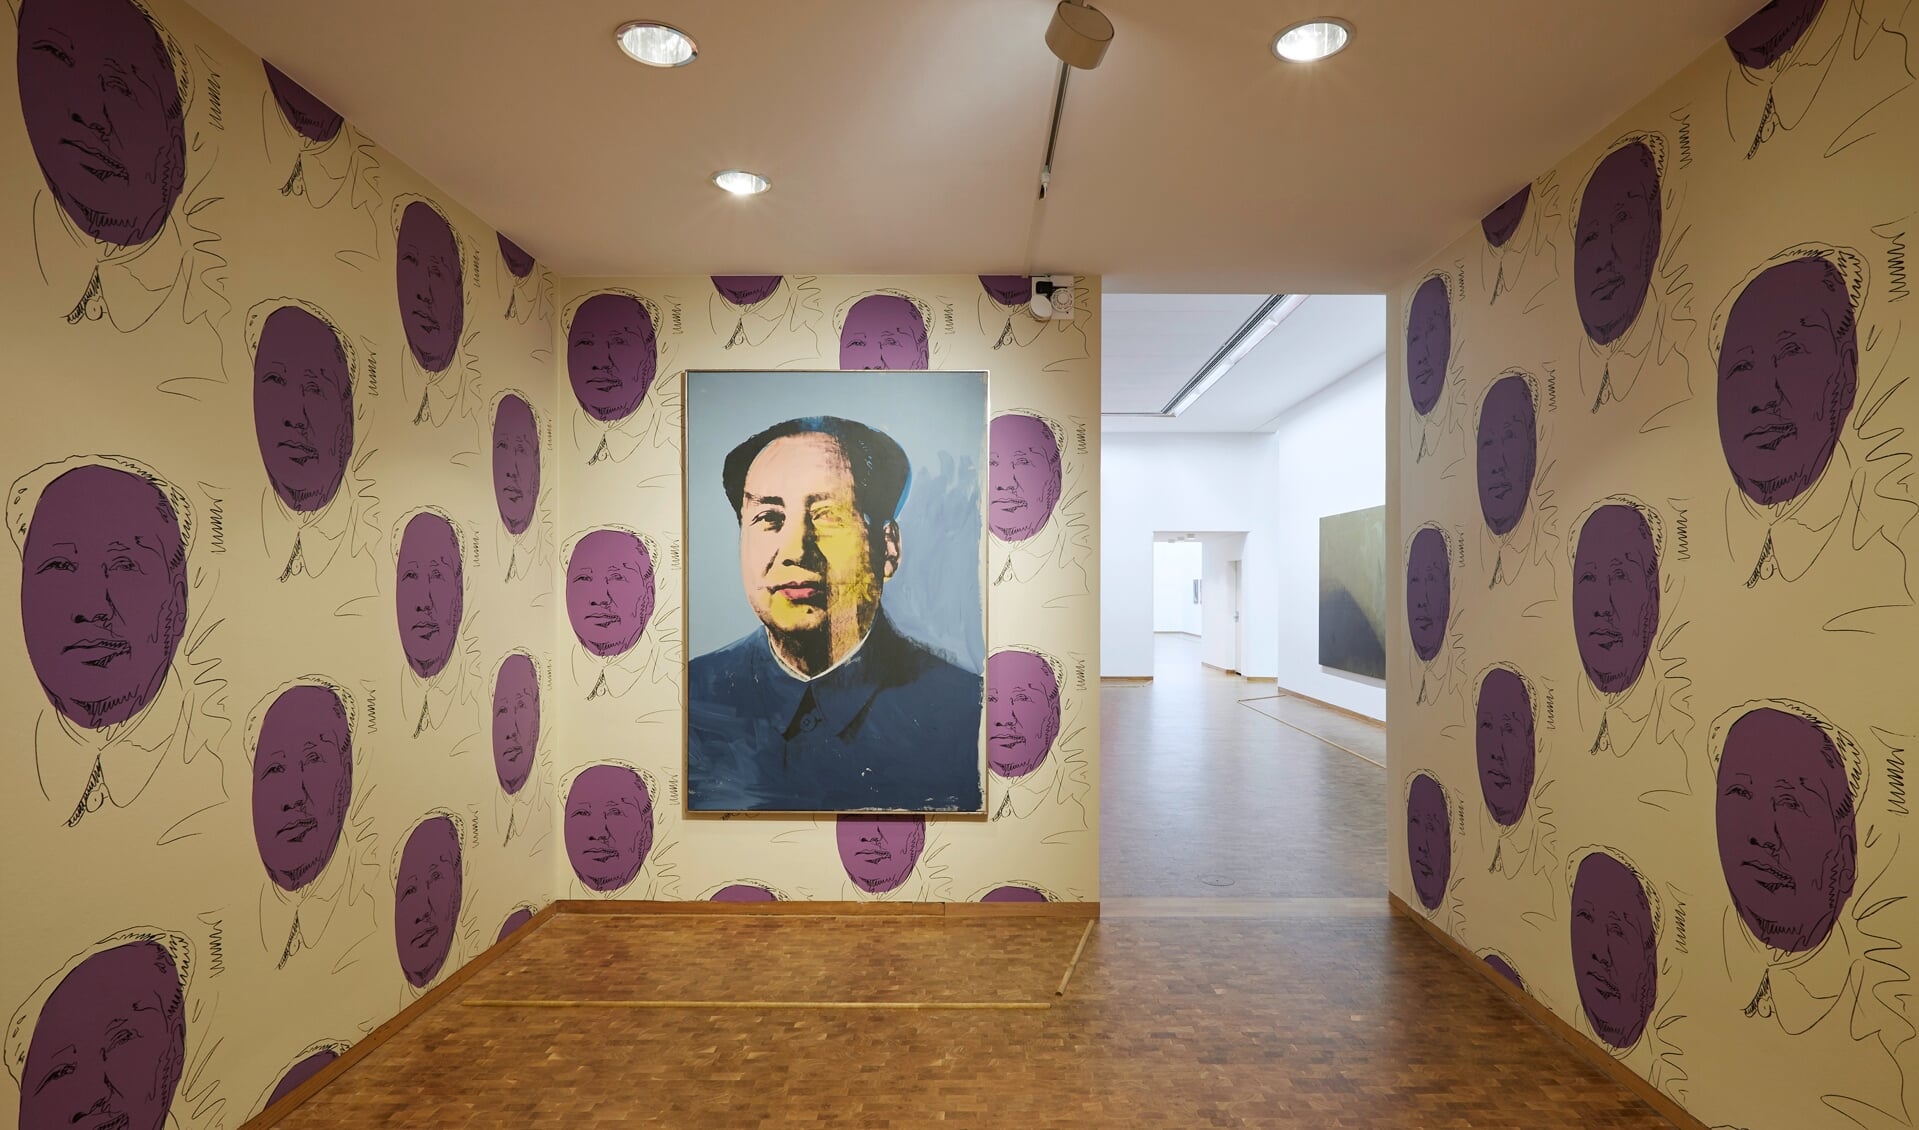 Installation fra Andy Warhol-udstillingen i Museum Ludwig i Köln. © 2021 The Andy Warhol Foundation for the Visual Arts, Inc. Licensed by Artists Rights Society (ARS), New York
Foto: 